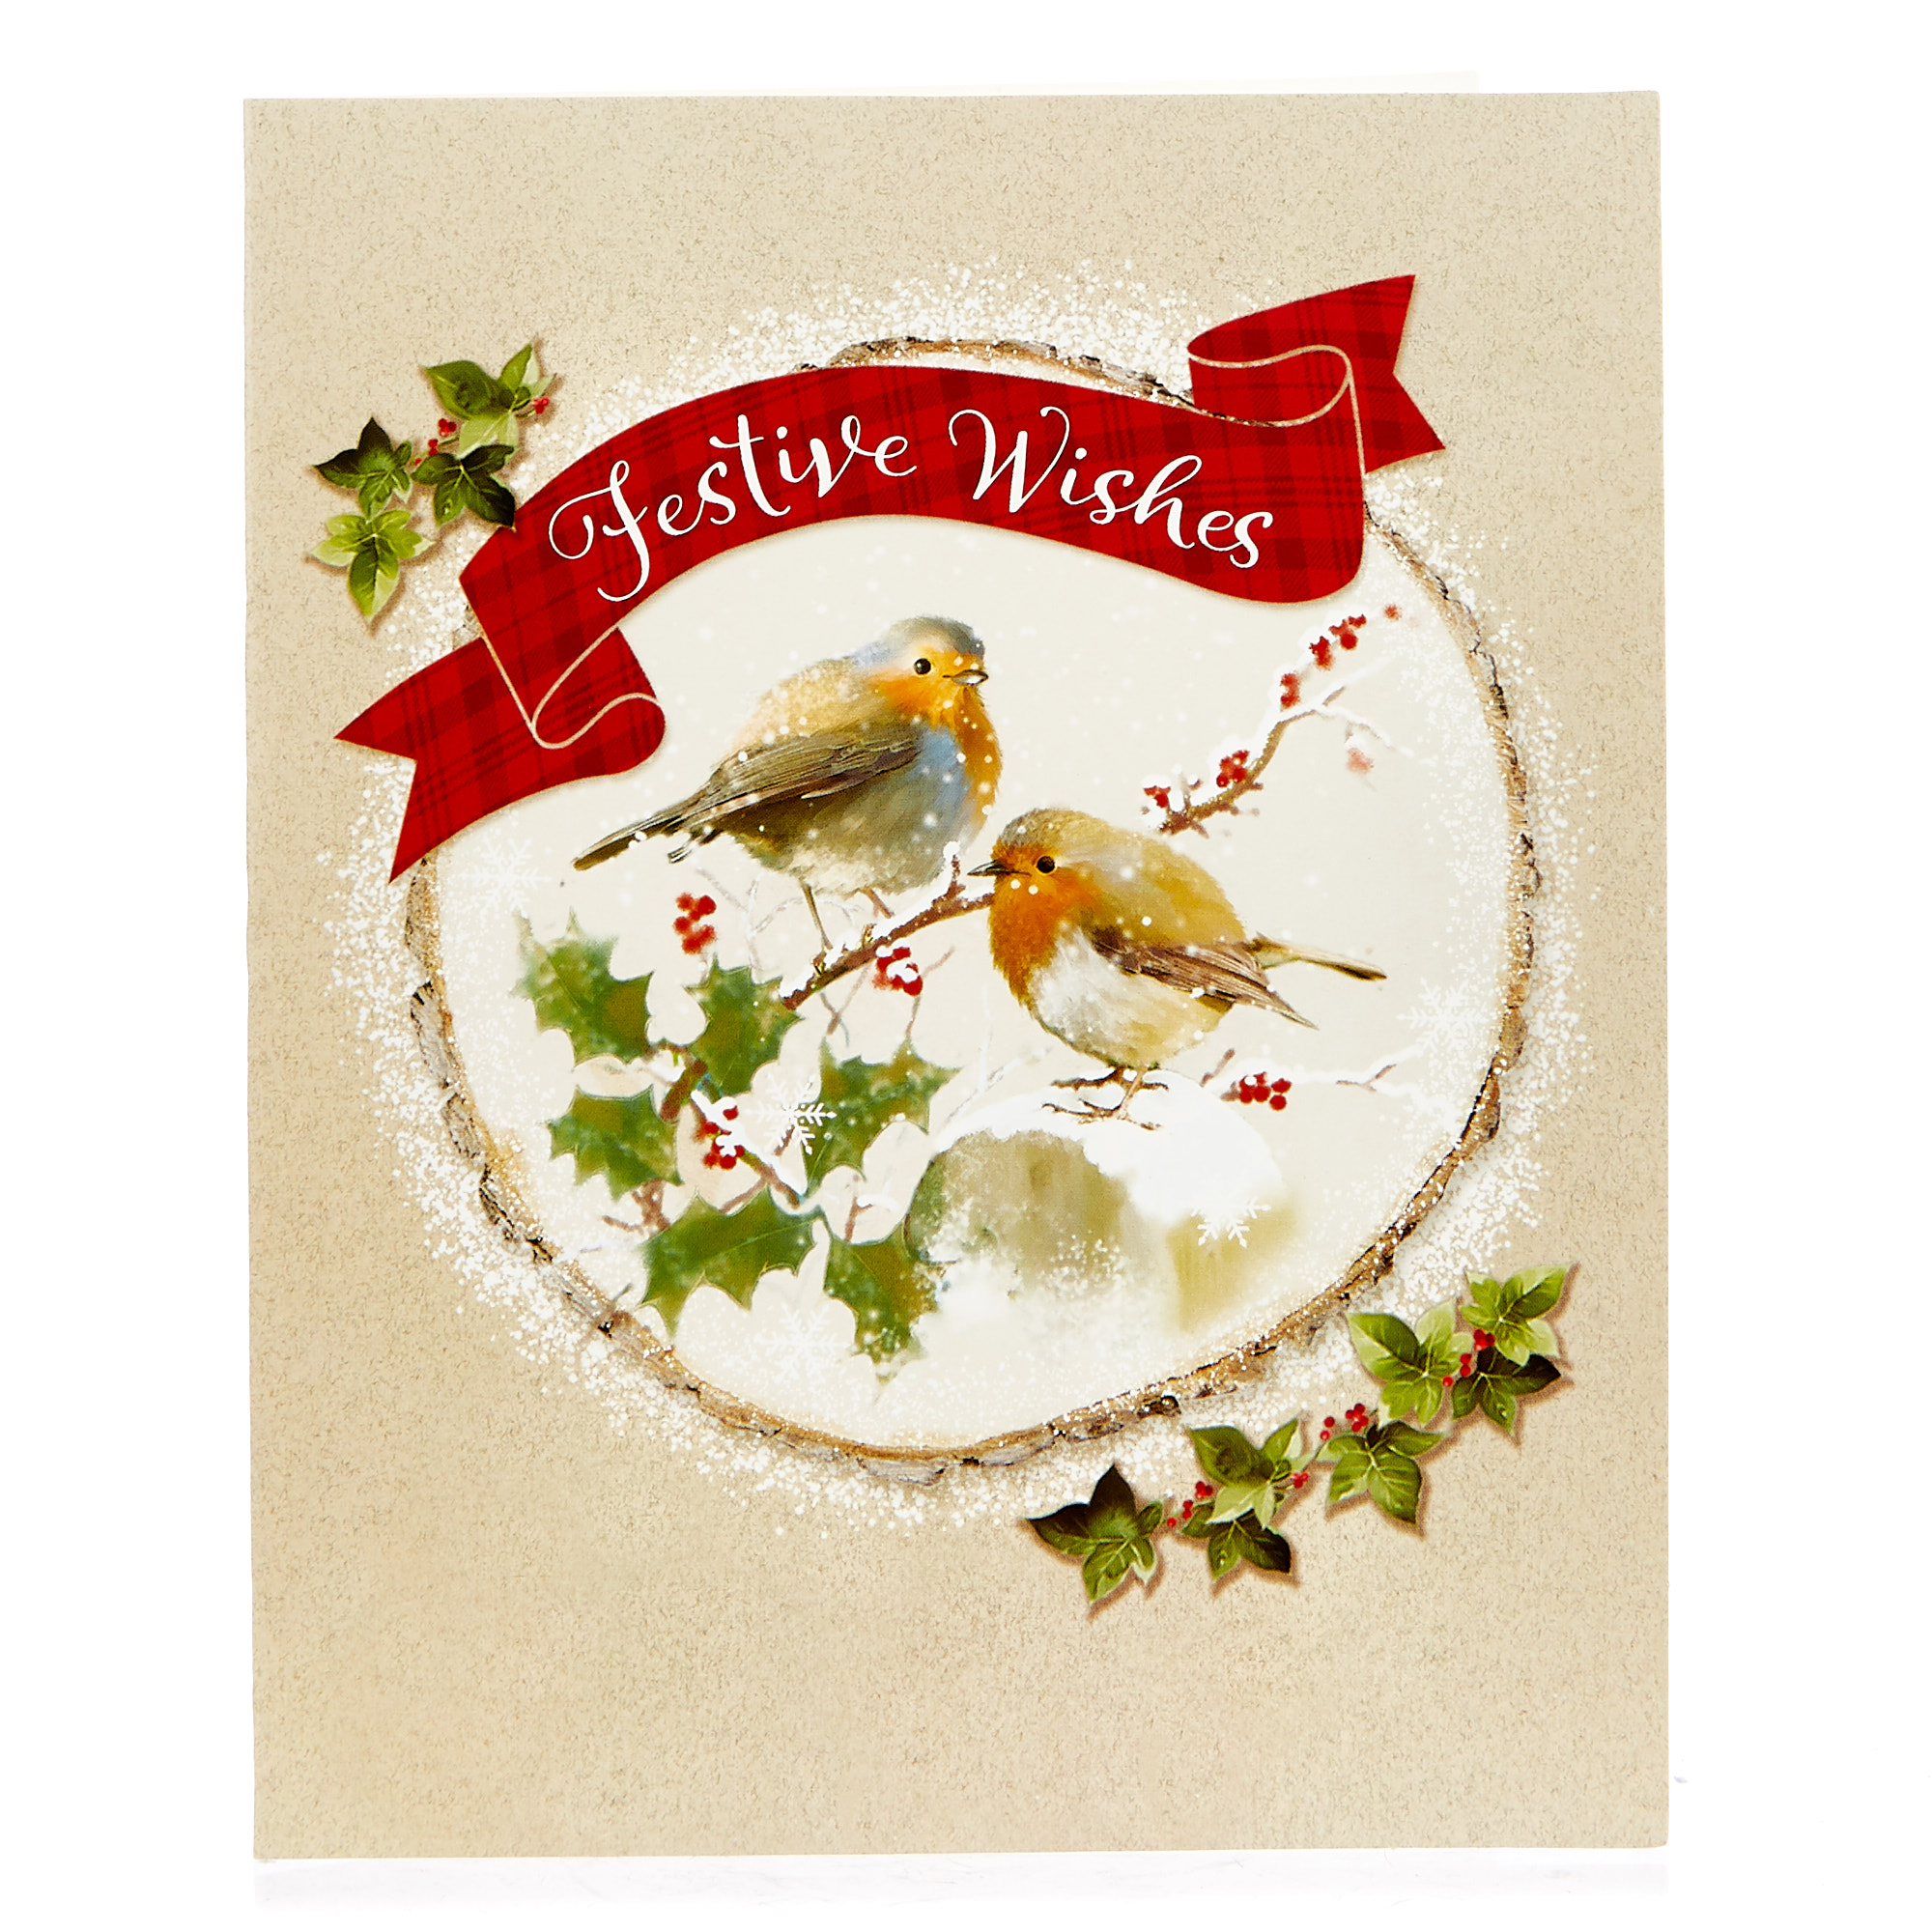 Boxed Value Christmas Cards - Pack of 30  